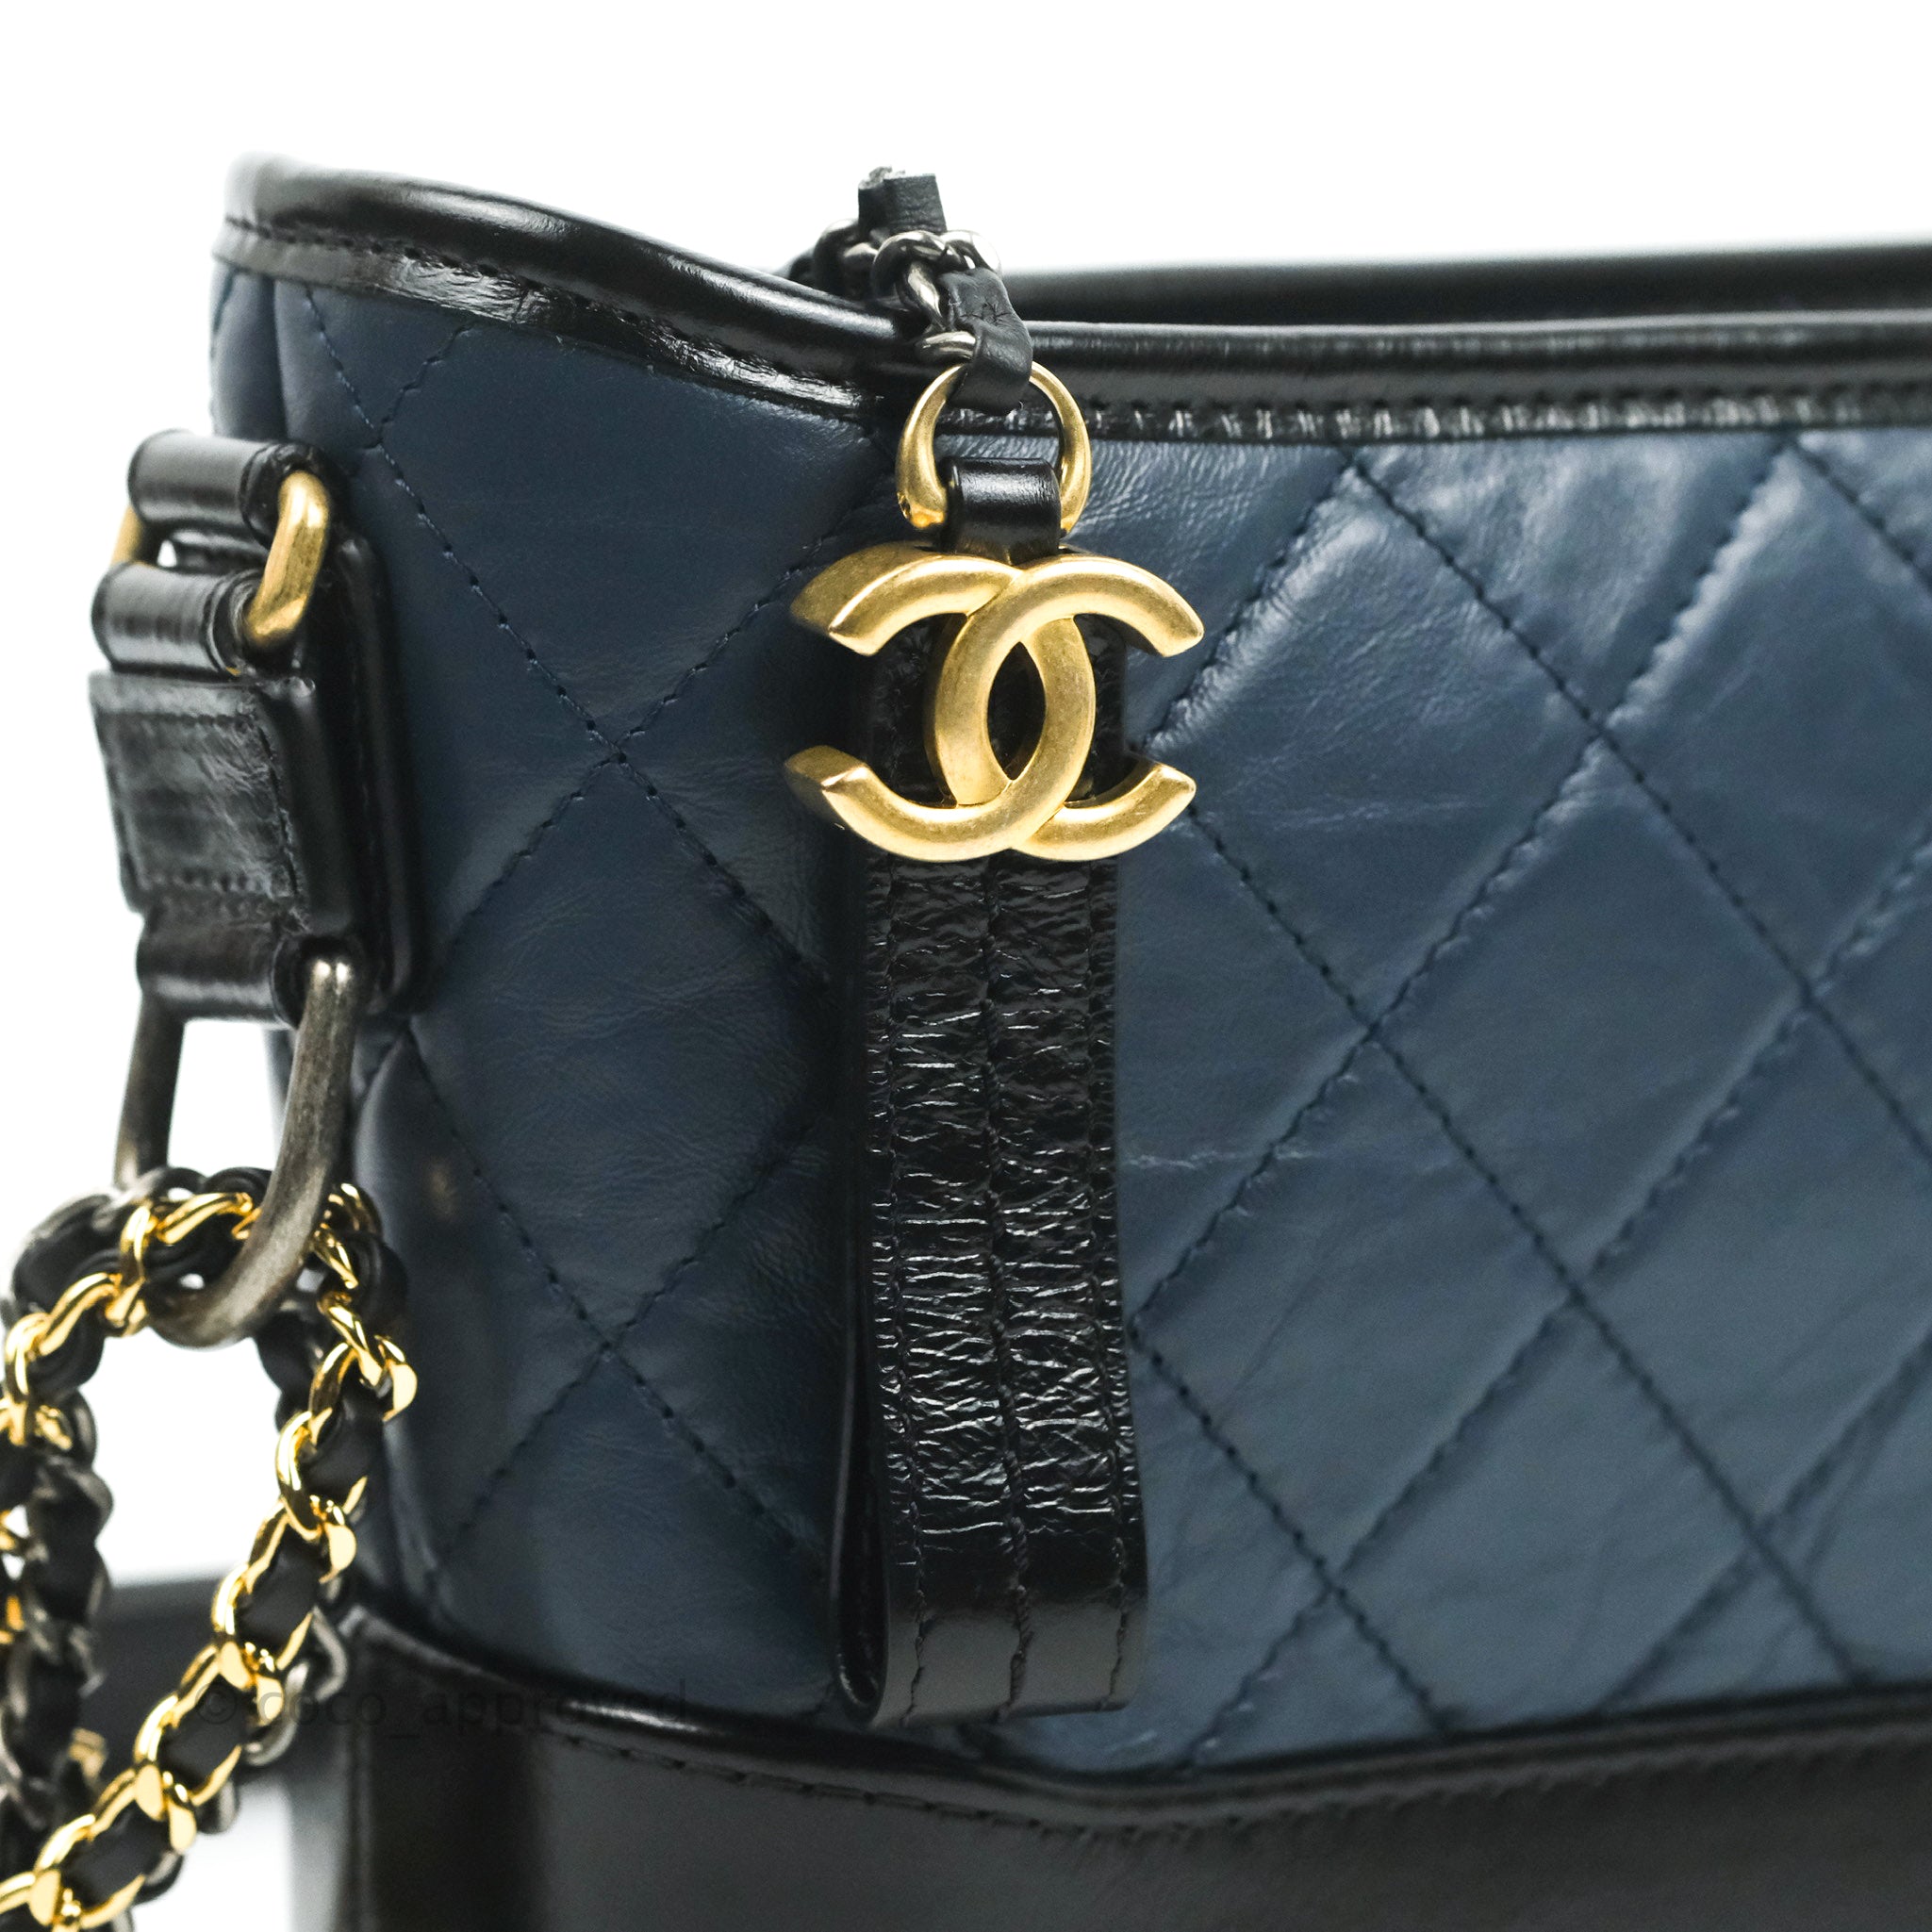 Chanel New Medium Gabrielle Blue Logo Handle Aged Calfskin Mixed Hardw –  Coco Approved Studio